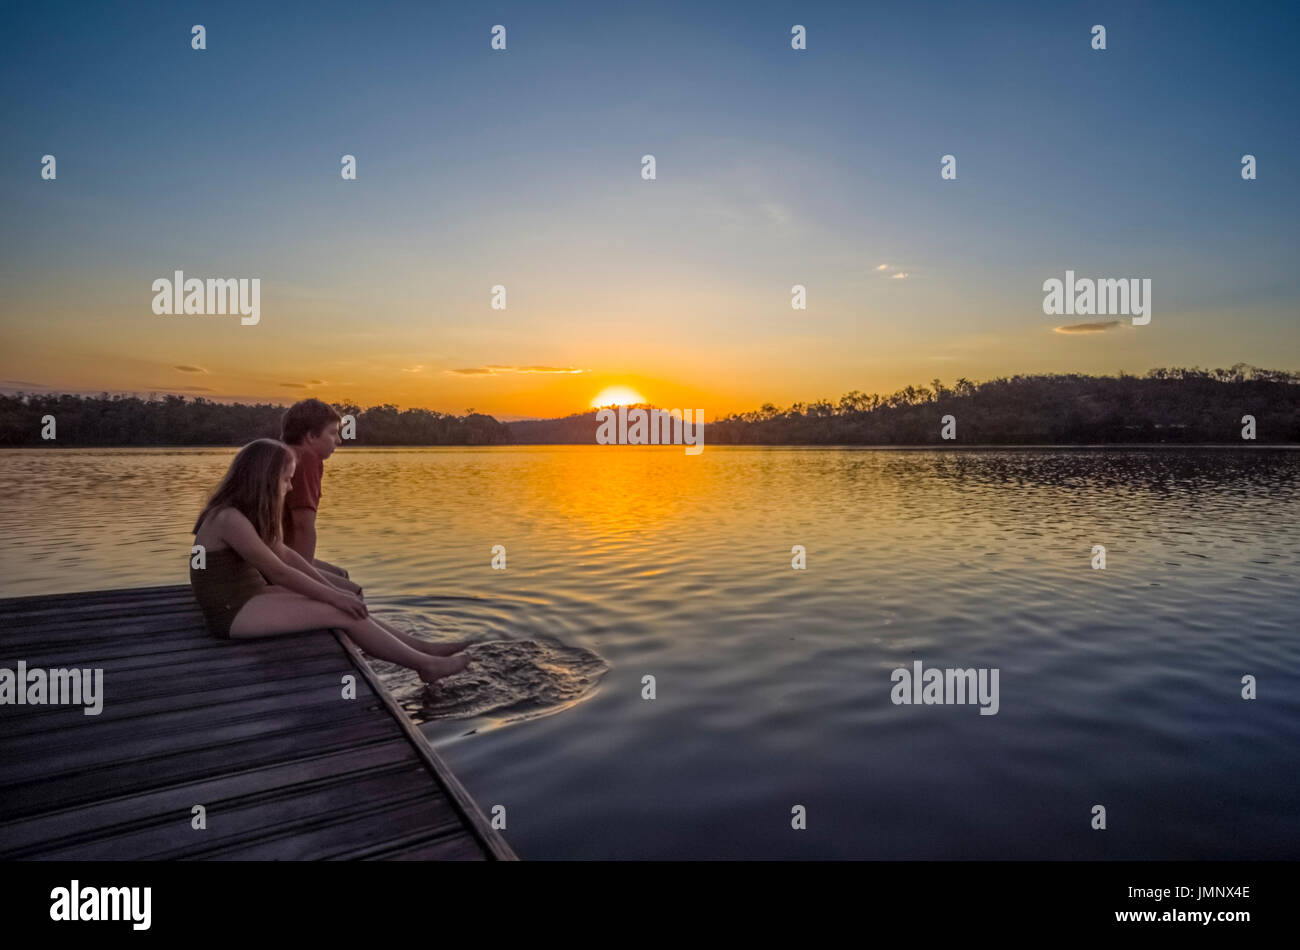 children having fun and jumping into  lake bennett from a jetty at the end of the day Stock Photo